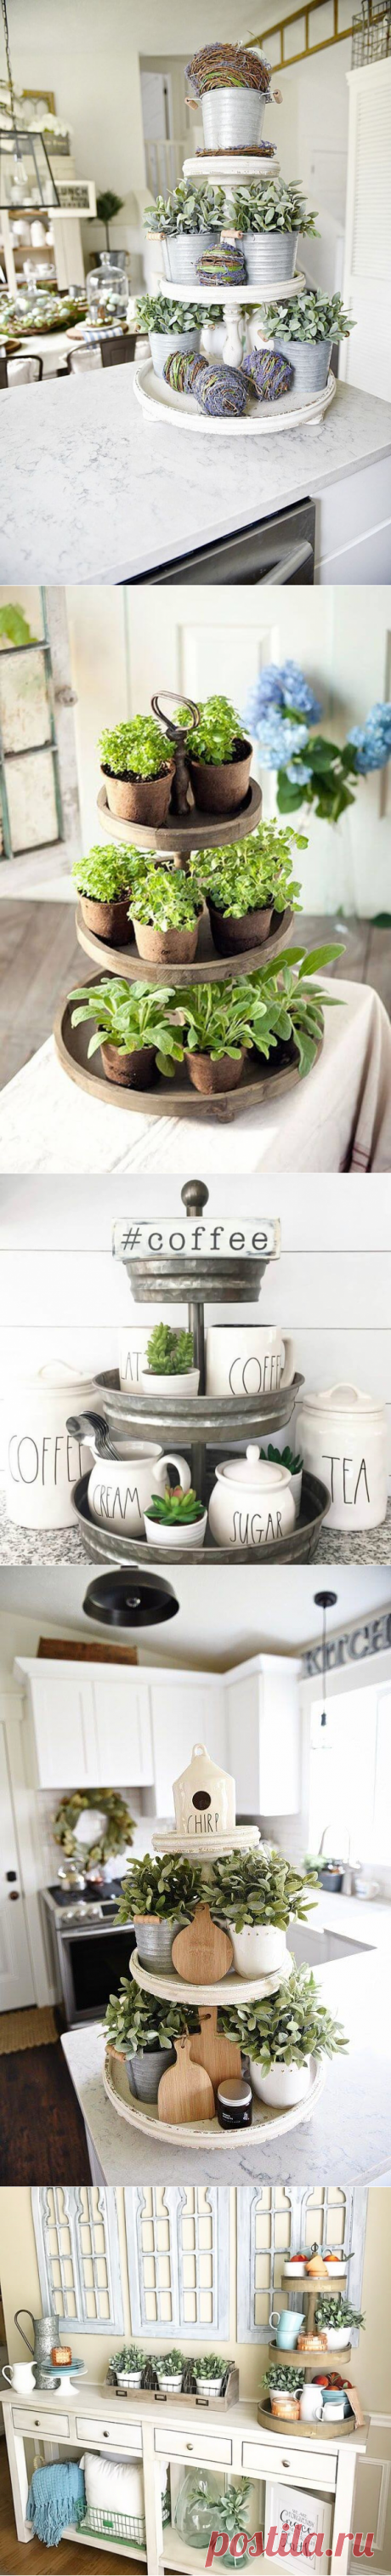 33 Best Farmhouse Style Tray Decor Ideas and Designs for 2018